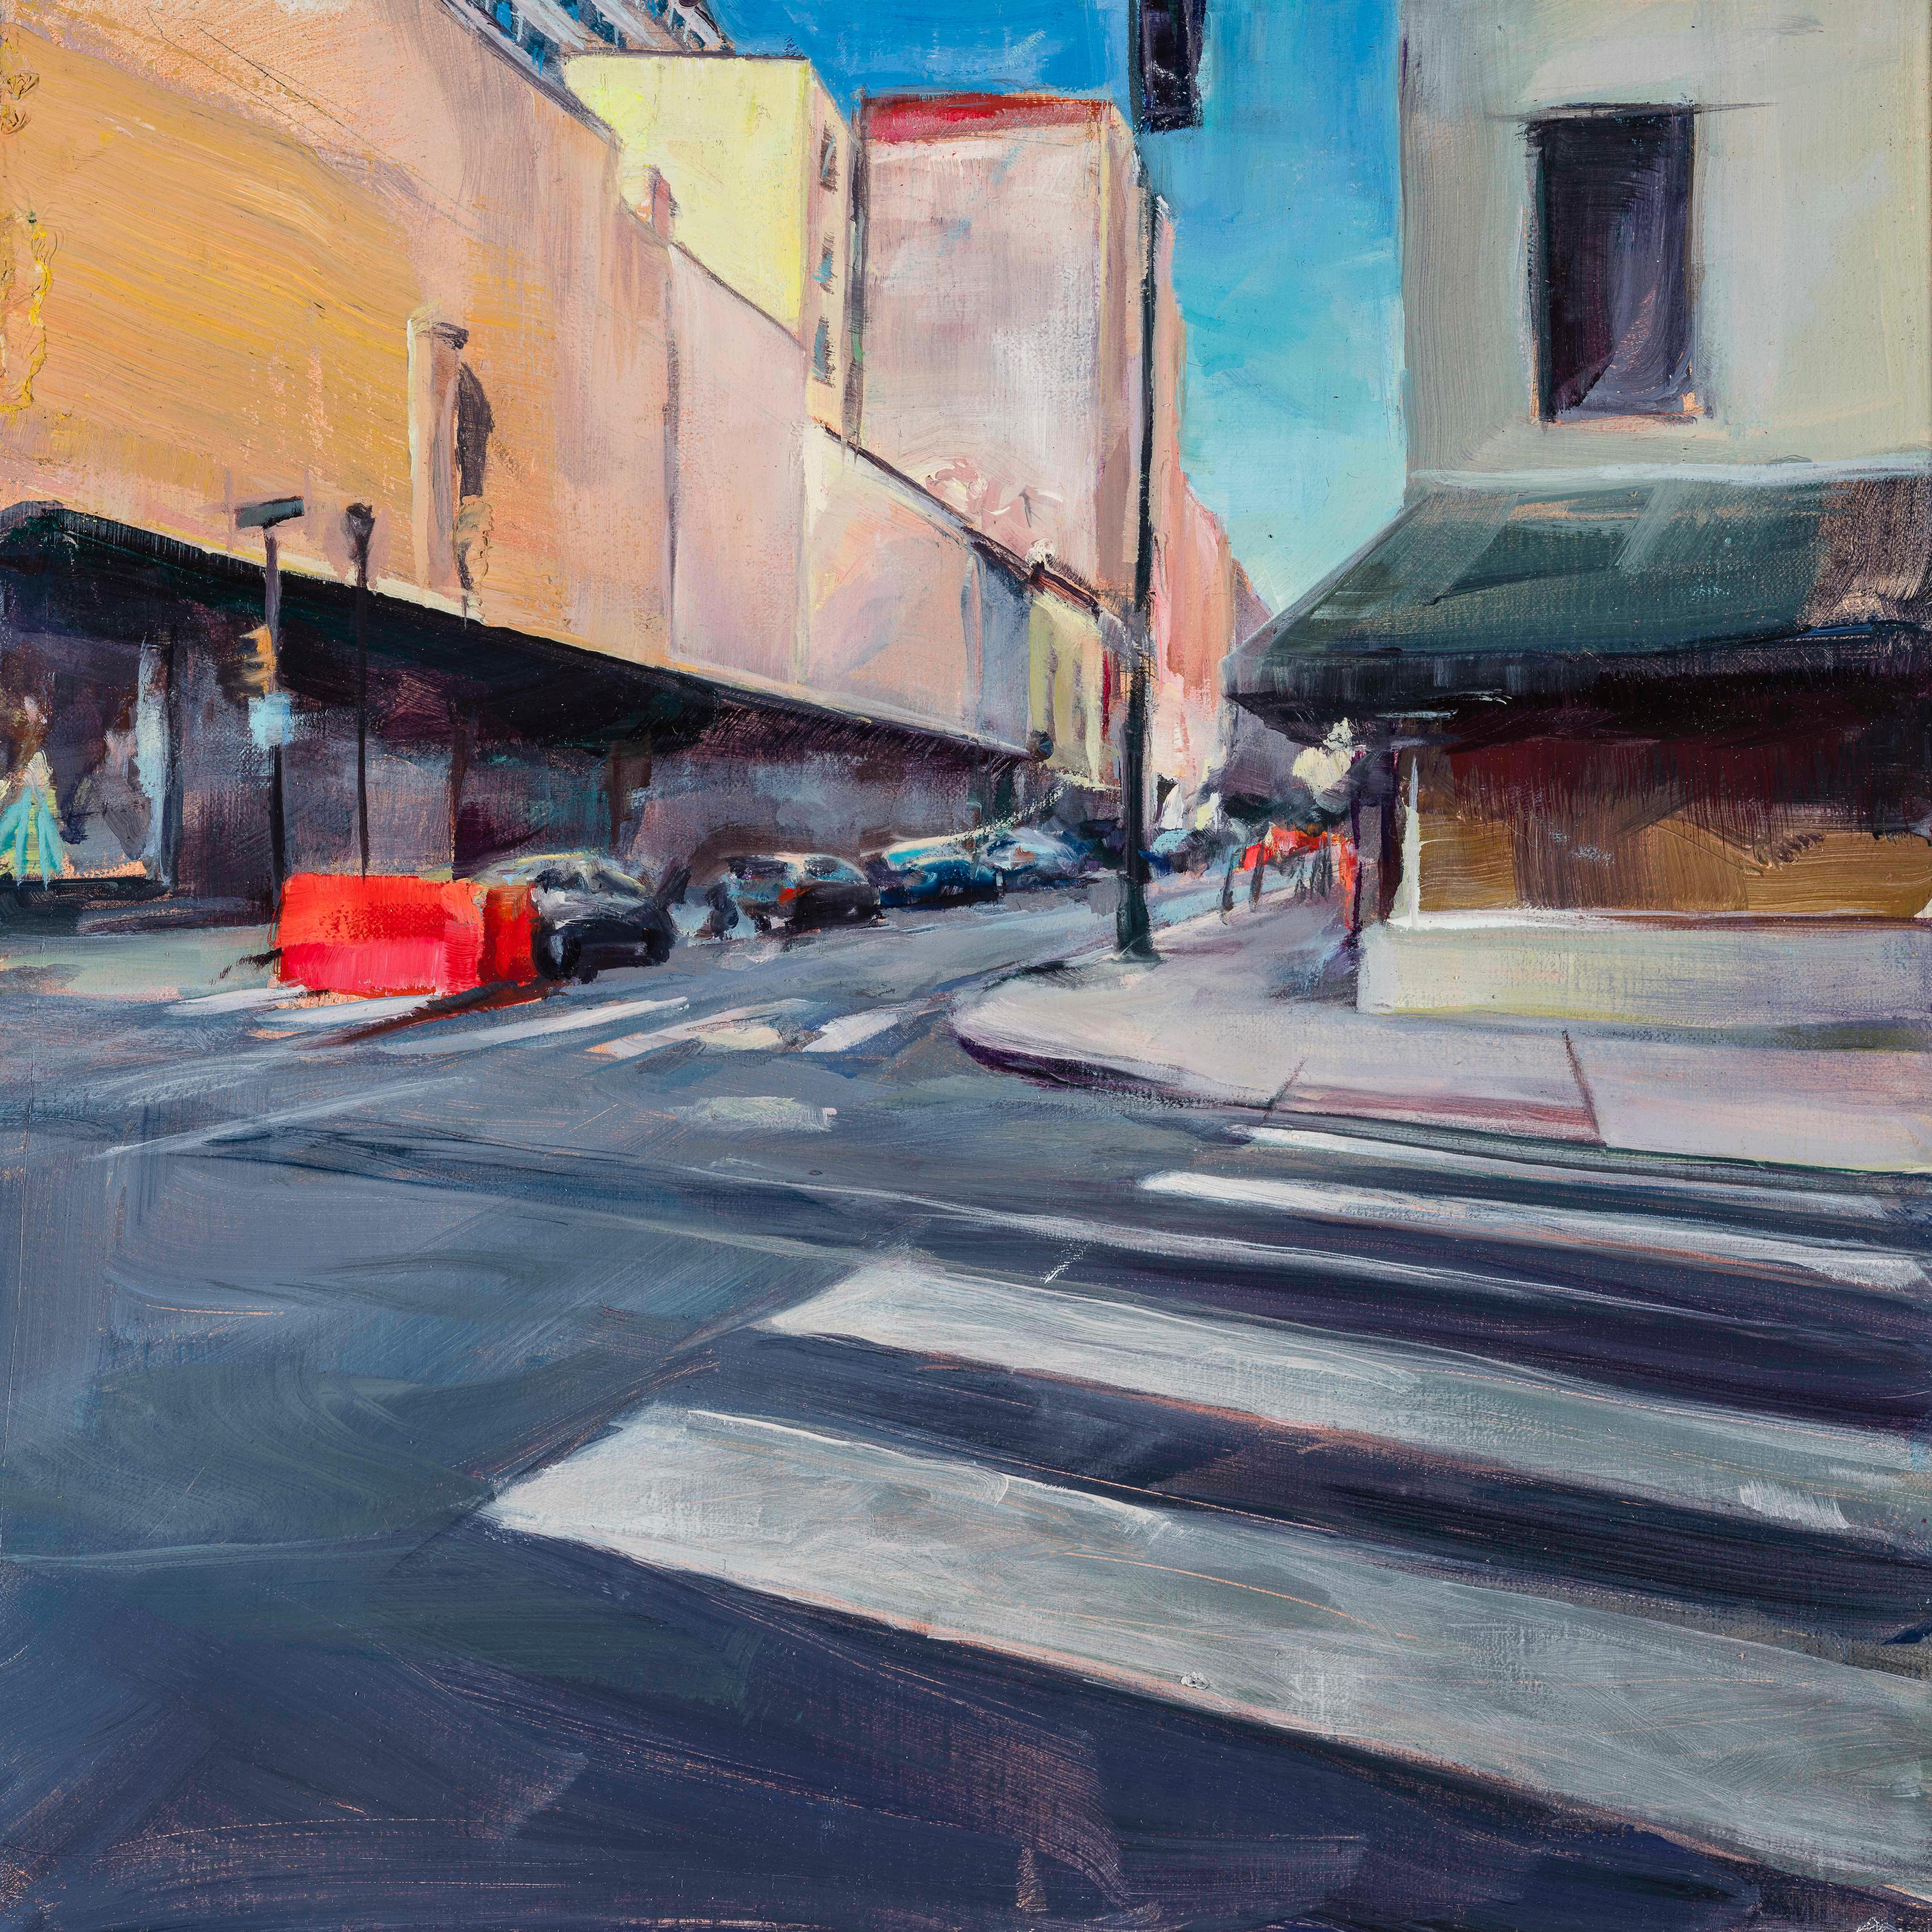 Intersection with Dress Shop - Painting by Kathryn Maher